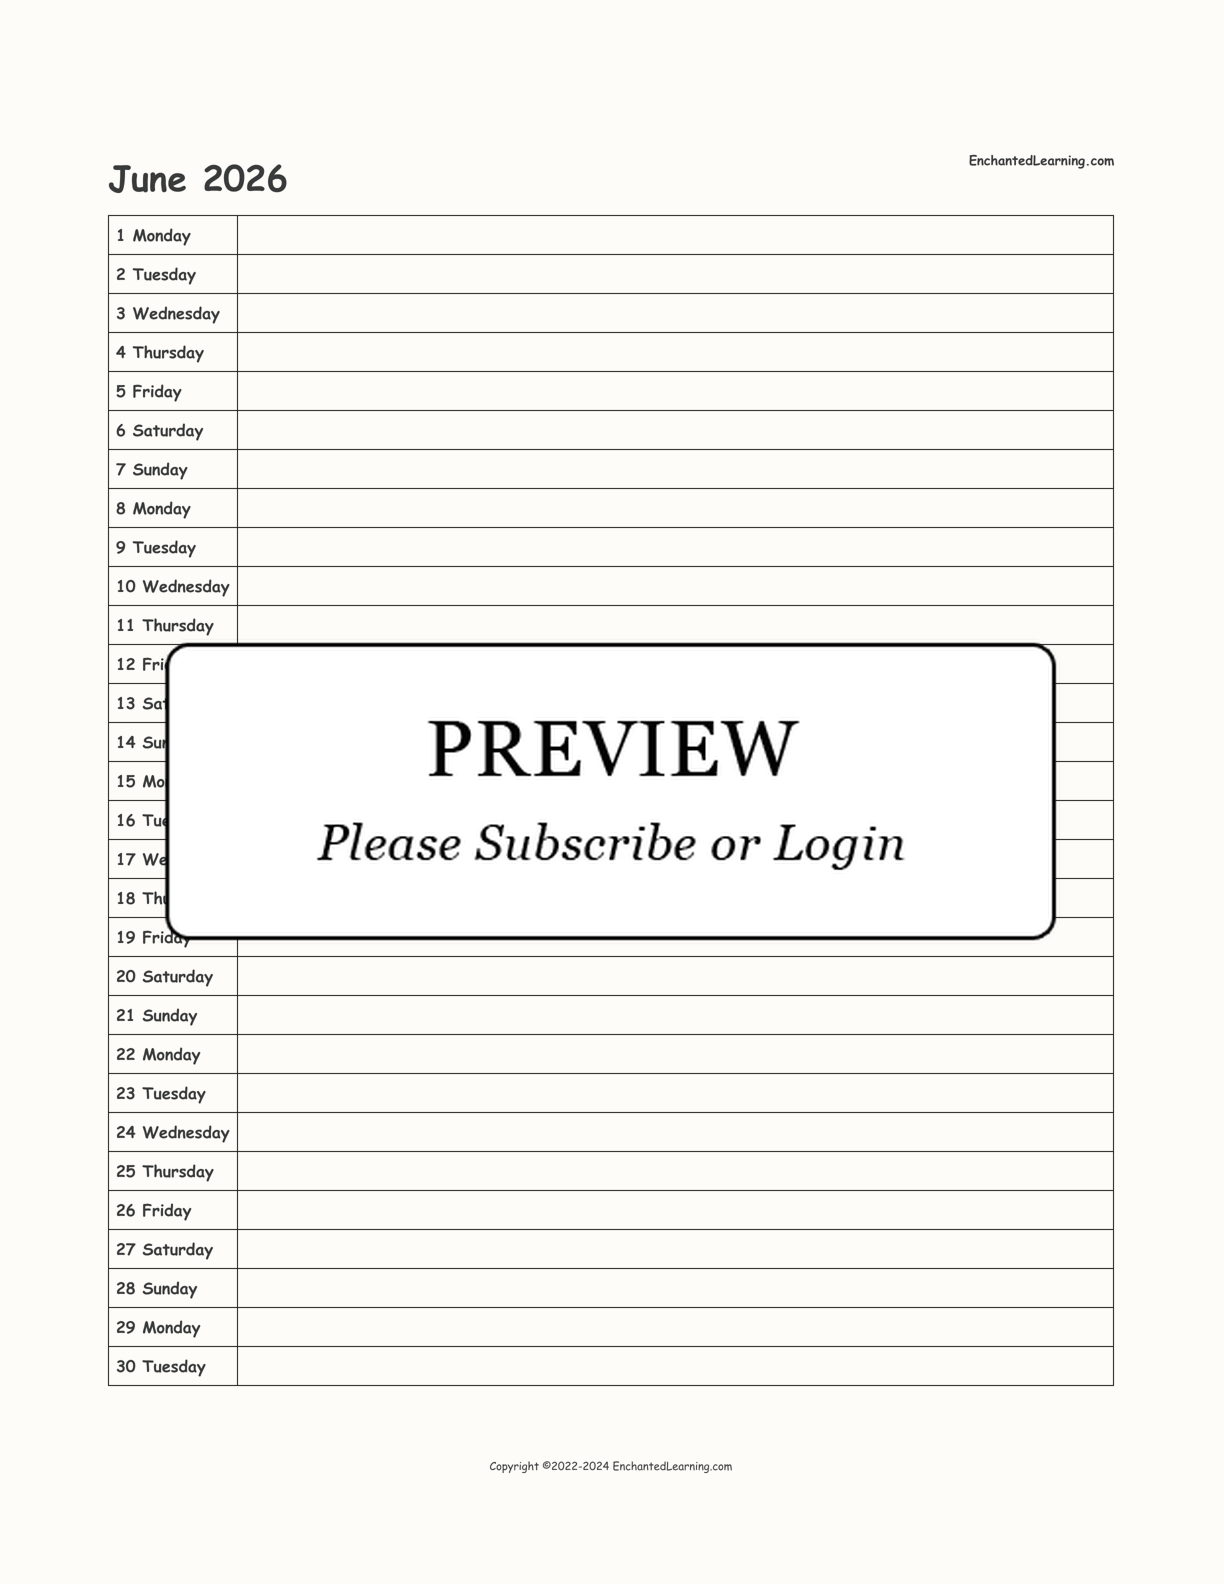 2026 Scheduling Calendar interactive printout page 6